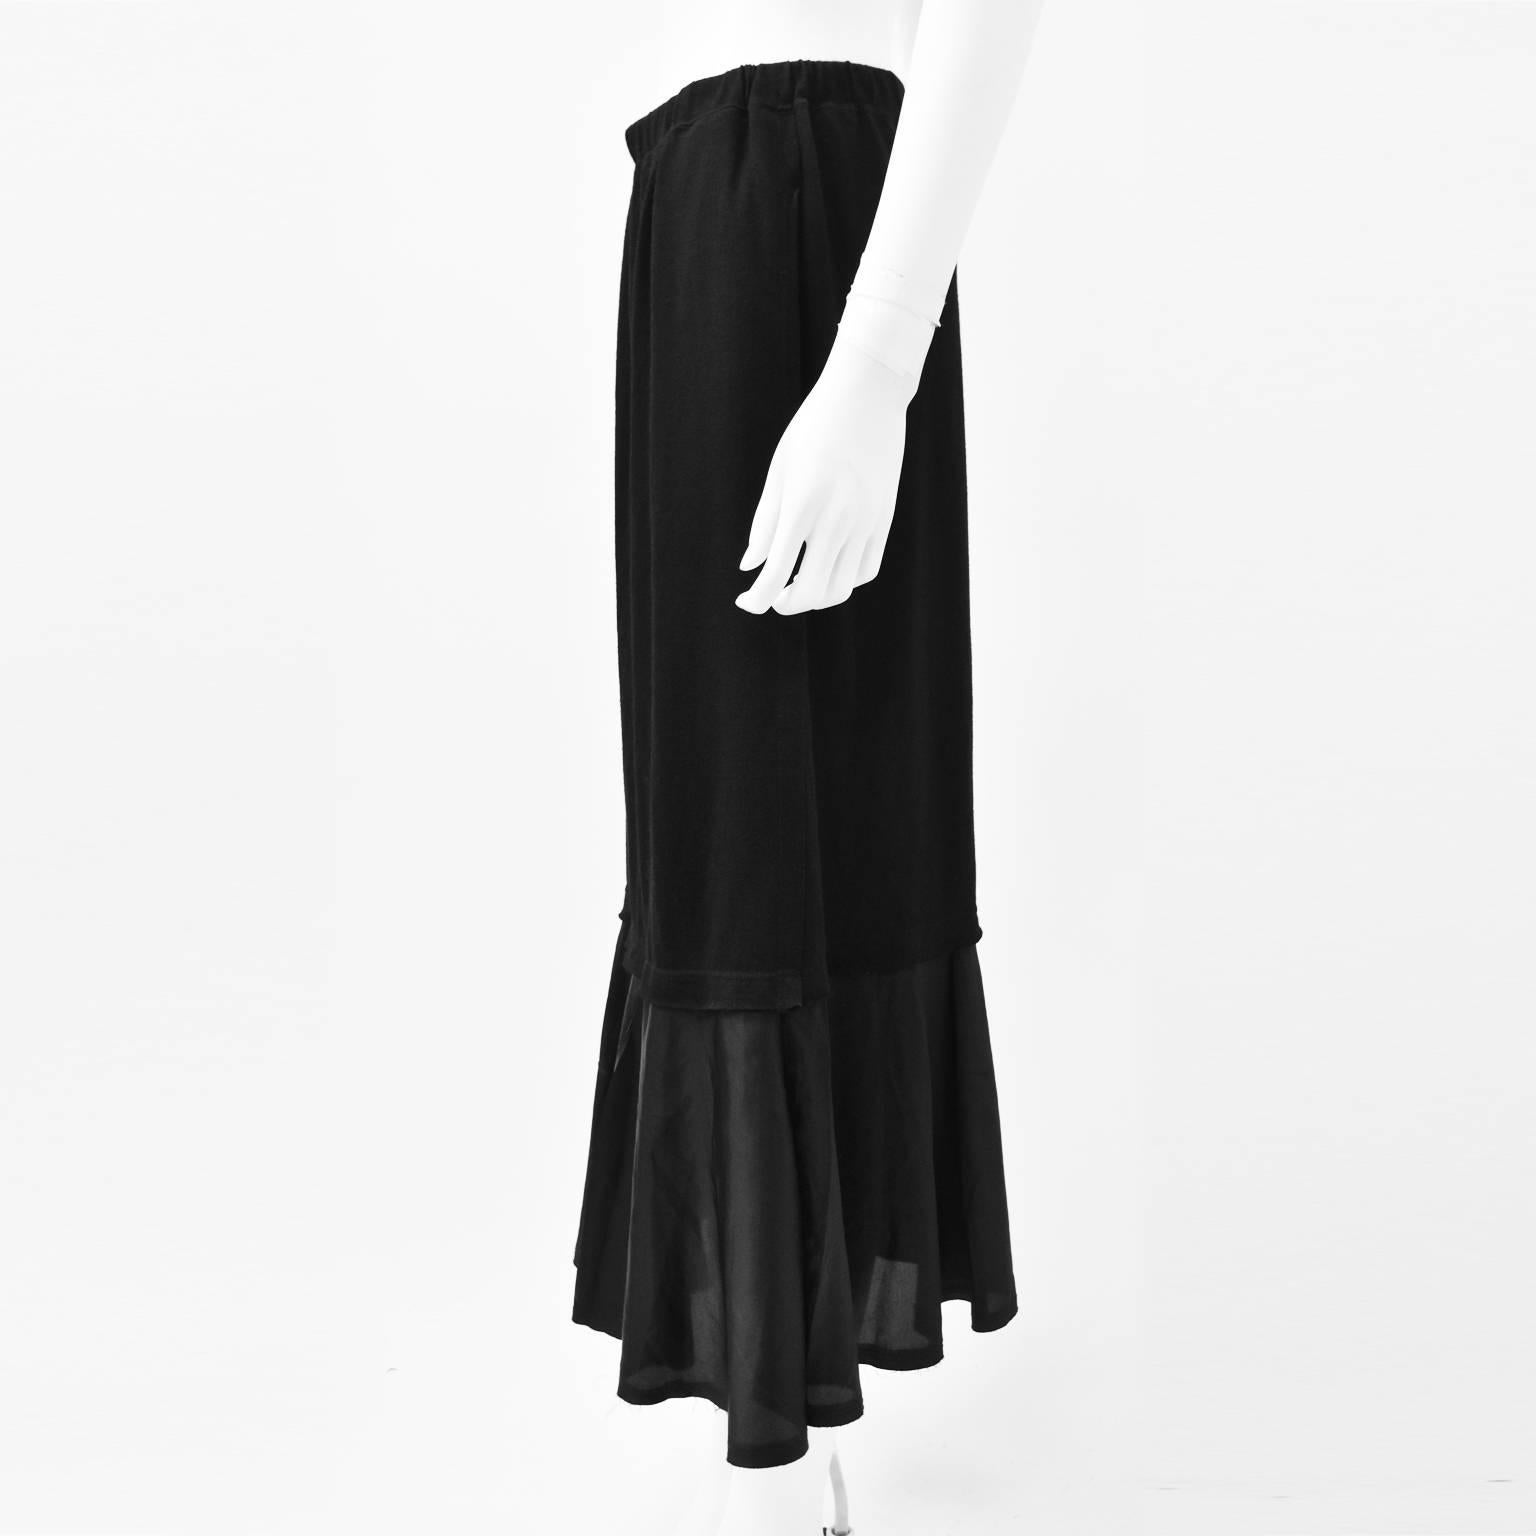  Comme des Garcons Black Wool and Rayon Contrast Hem Skirt  In Excellent Condition For Sale In London, GB